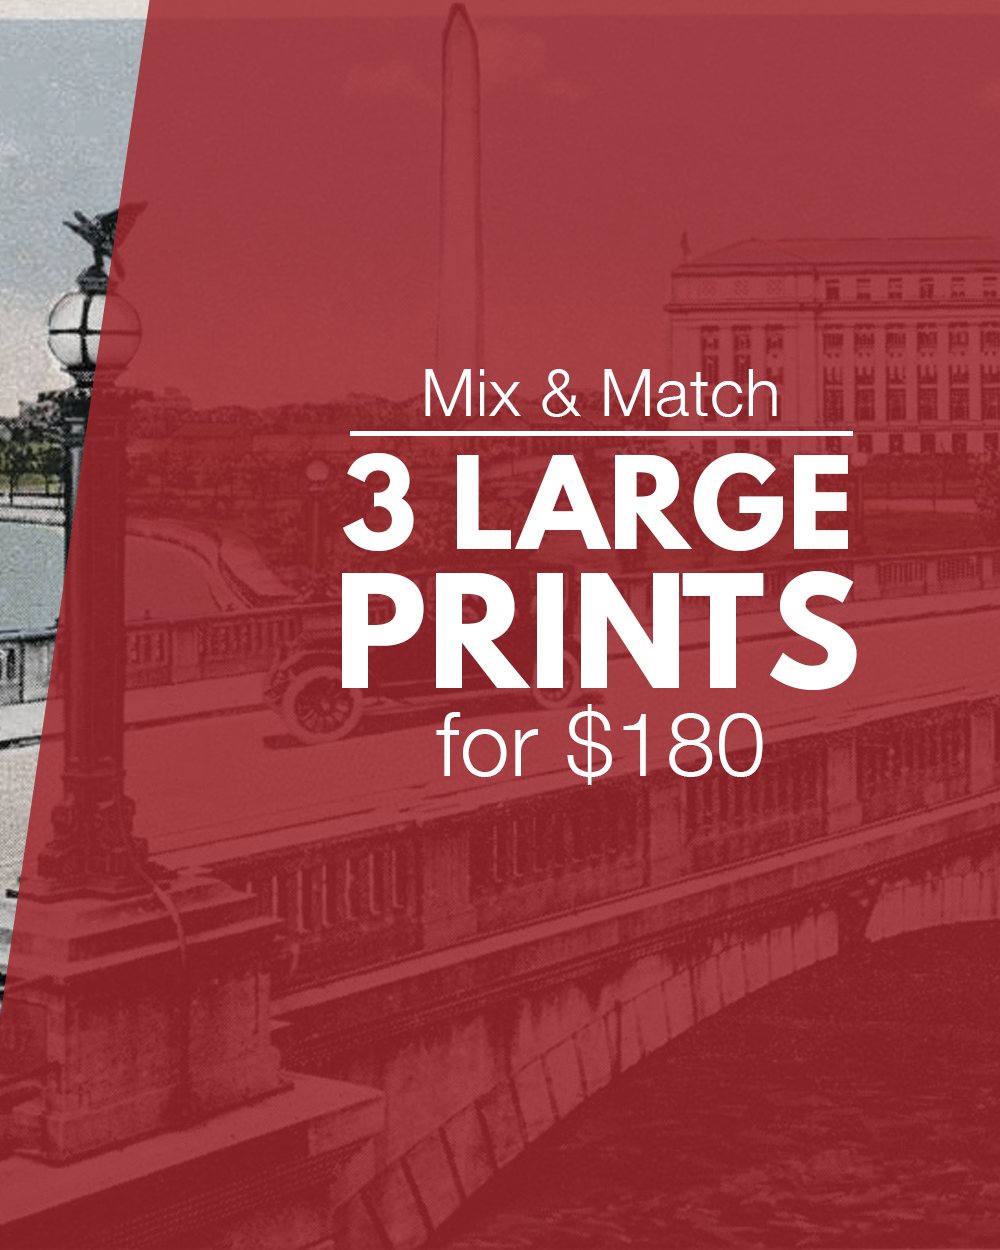 3 large prints for $180